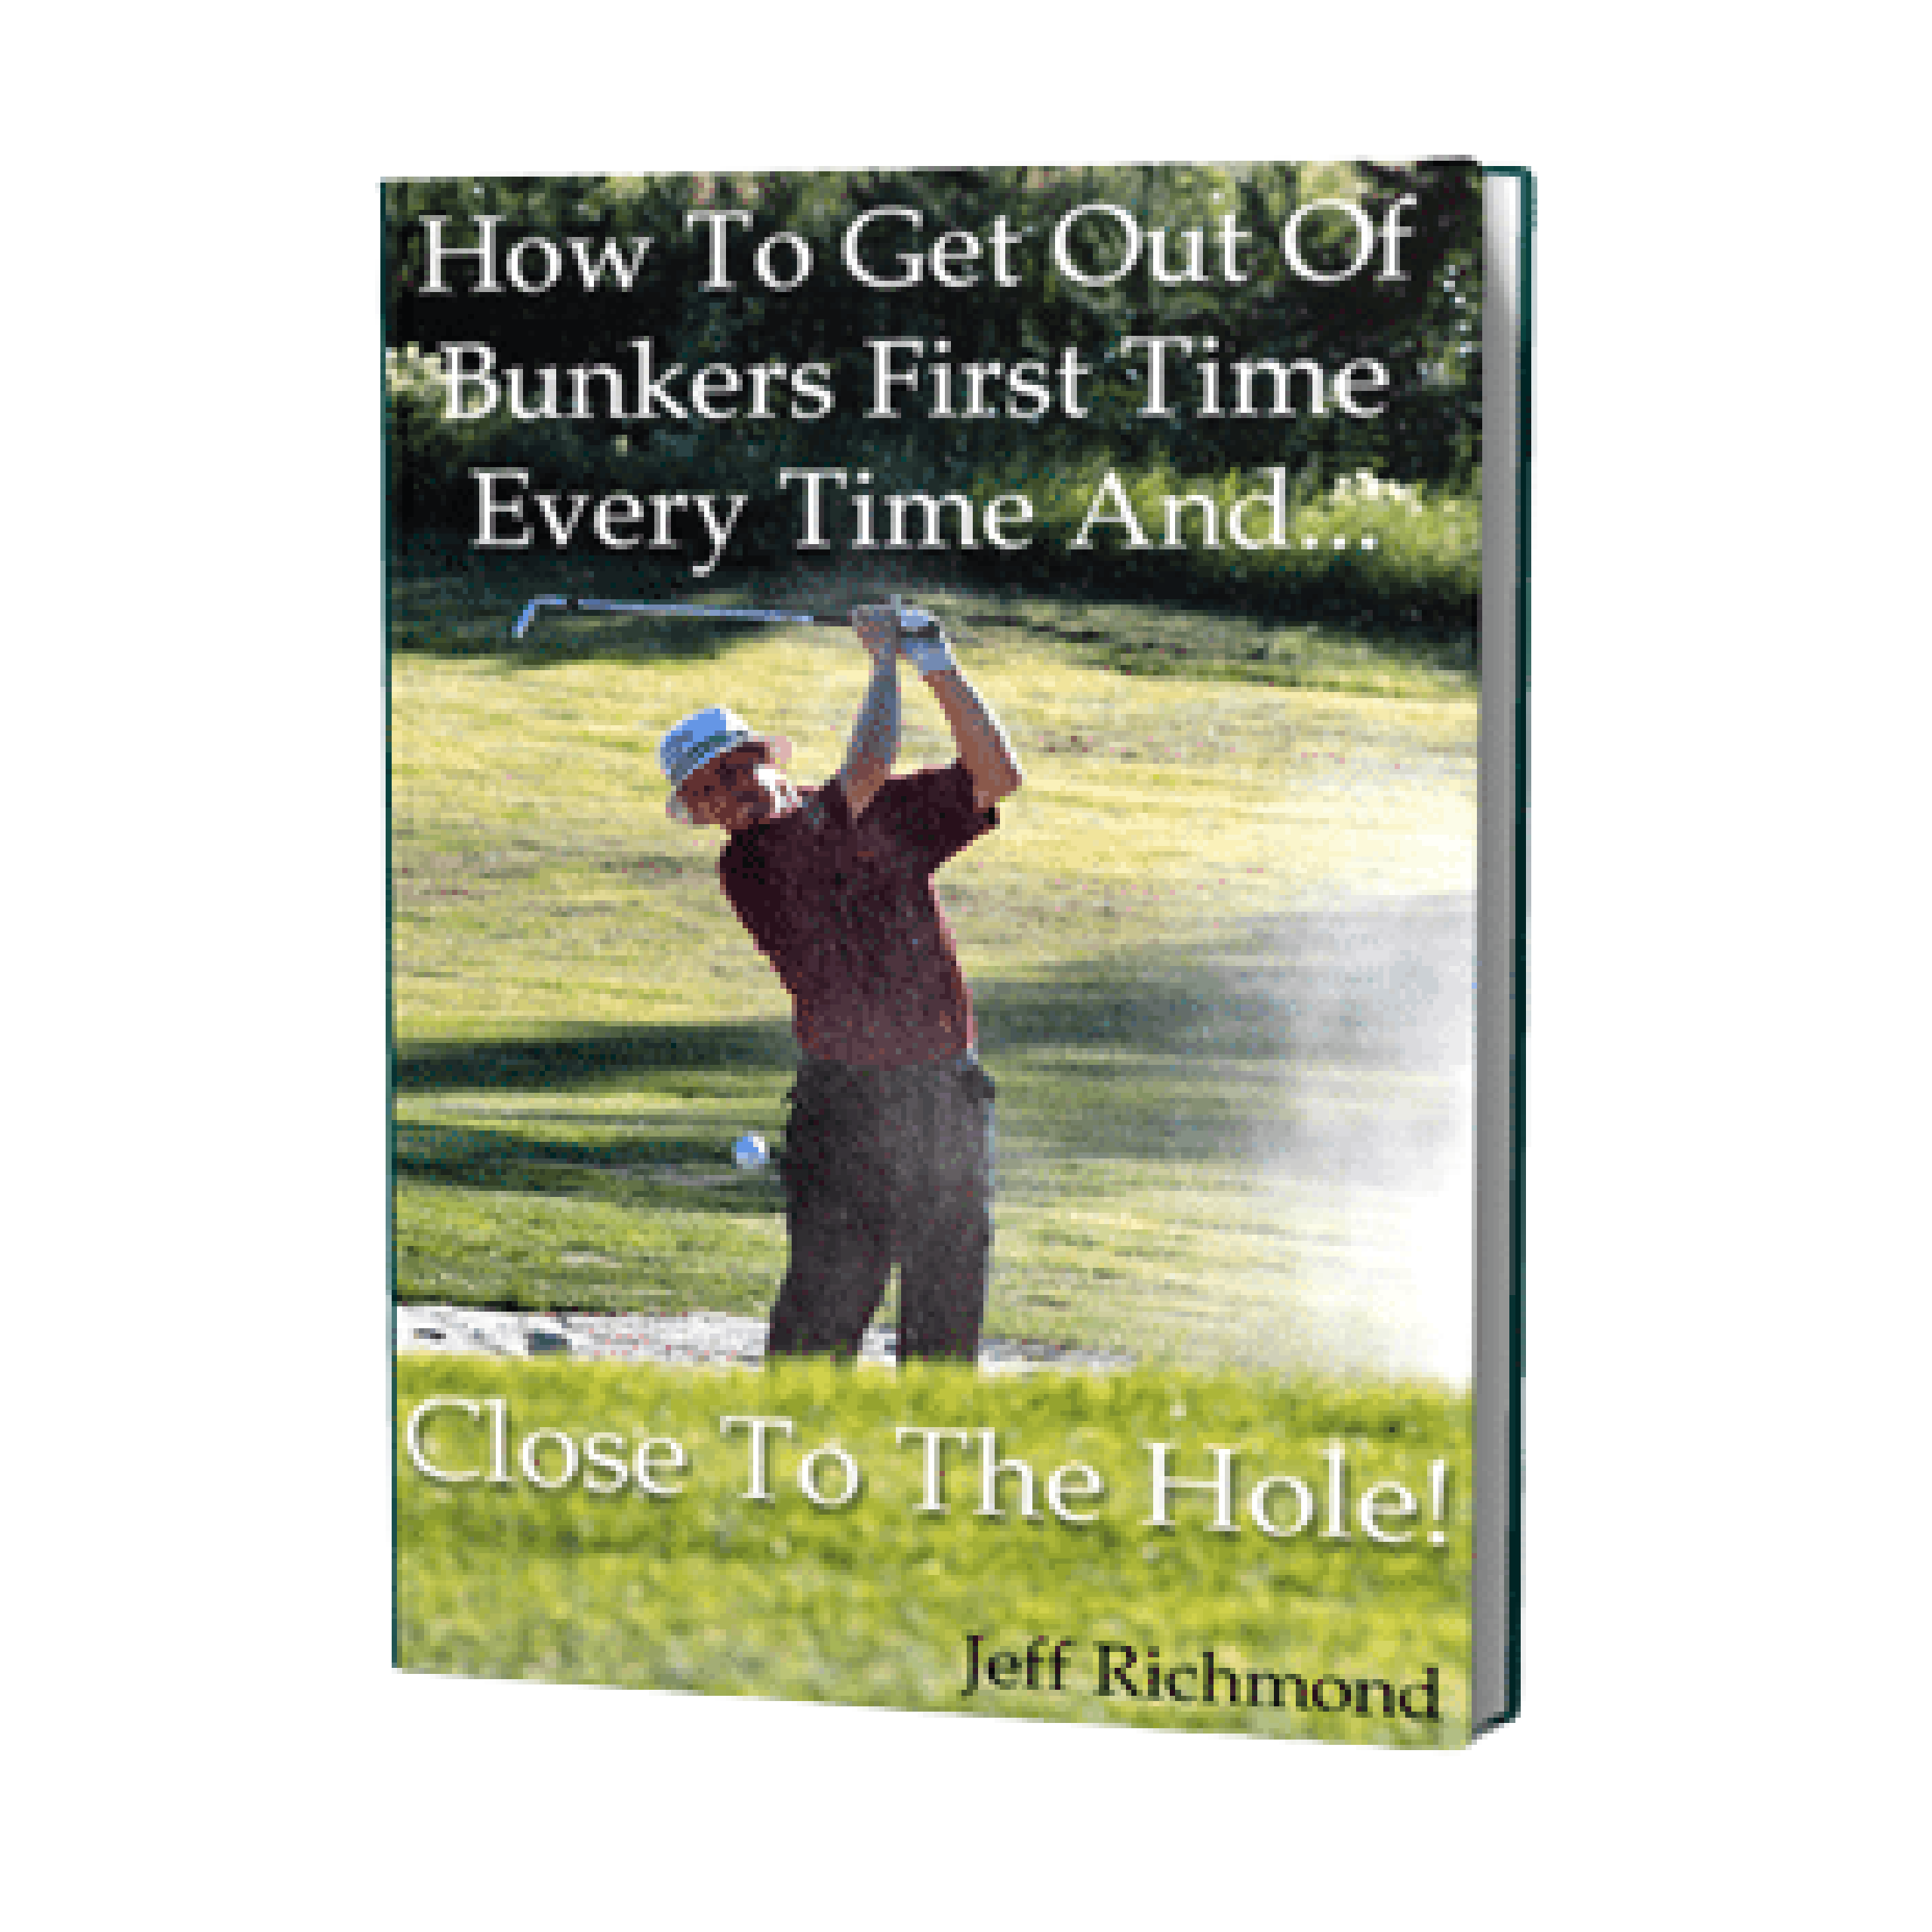 1 Secret To A Great Short Game